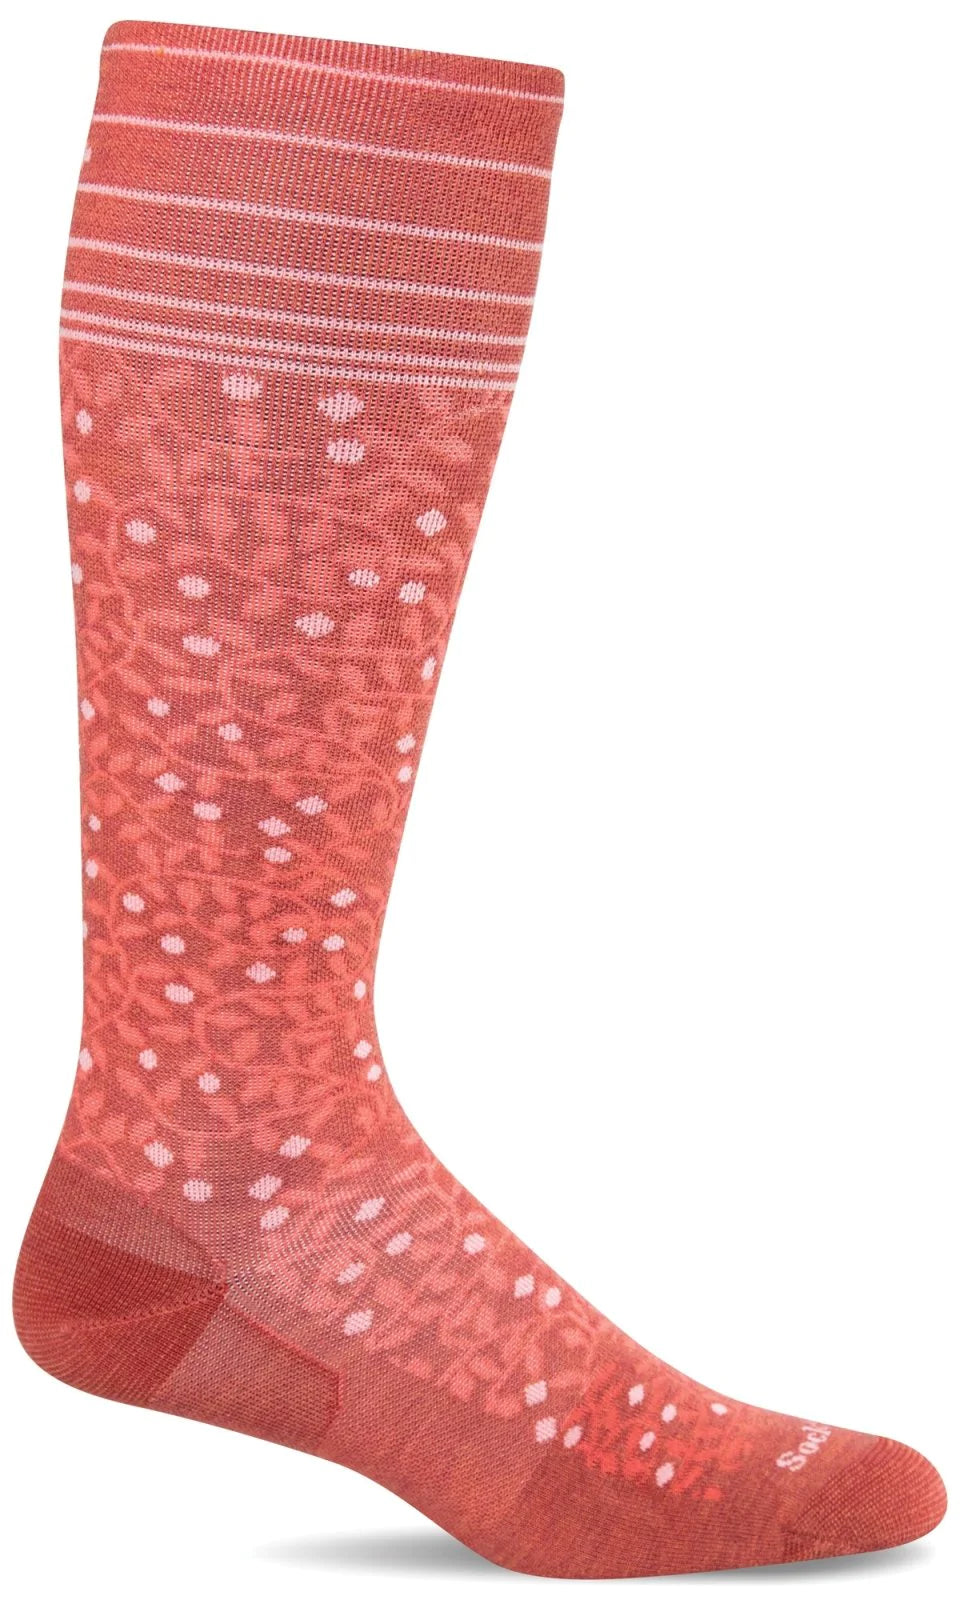 New Leaf Women's Bamboo/Merino Firm Graduated Compression Socks in Red or Blue